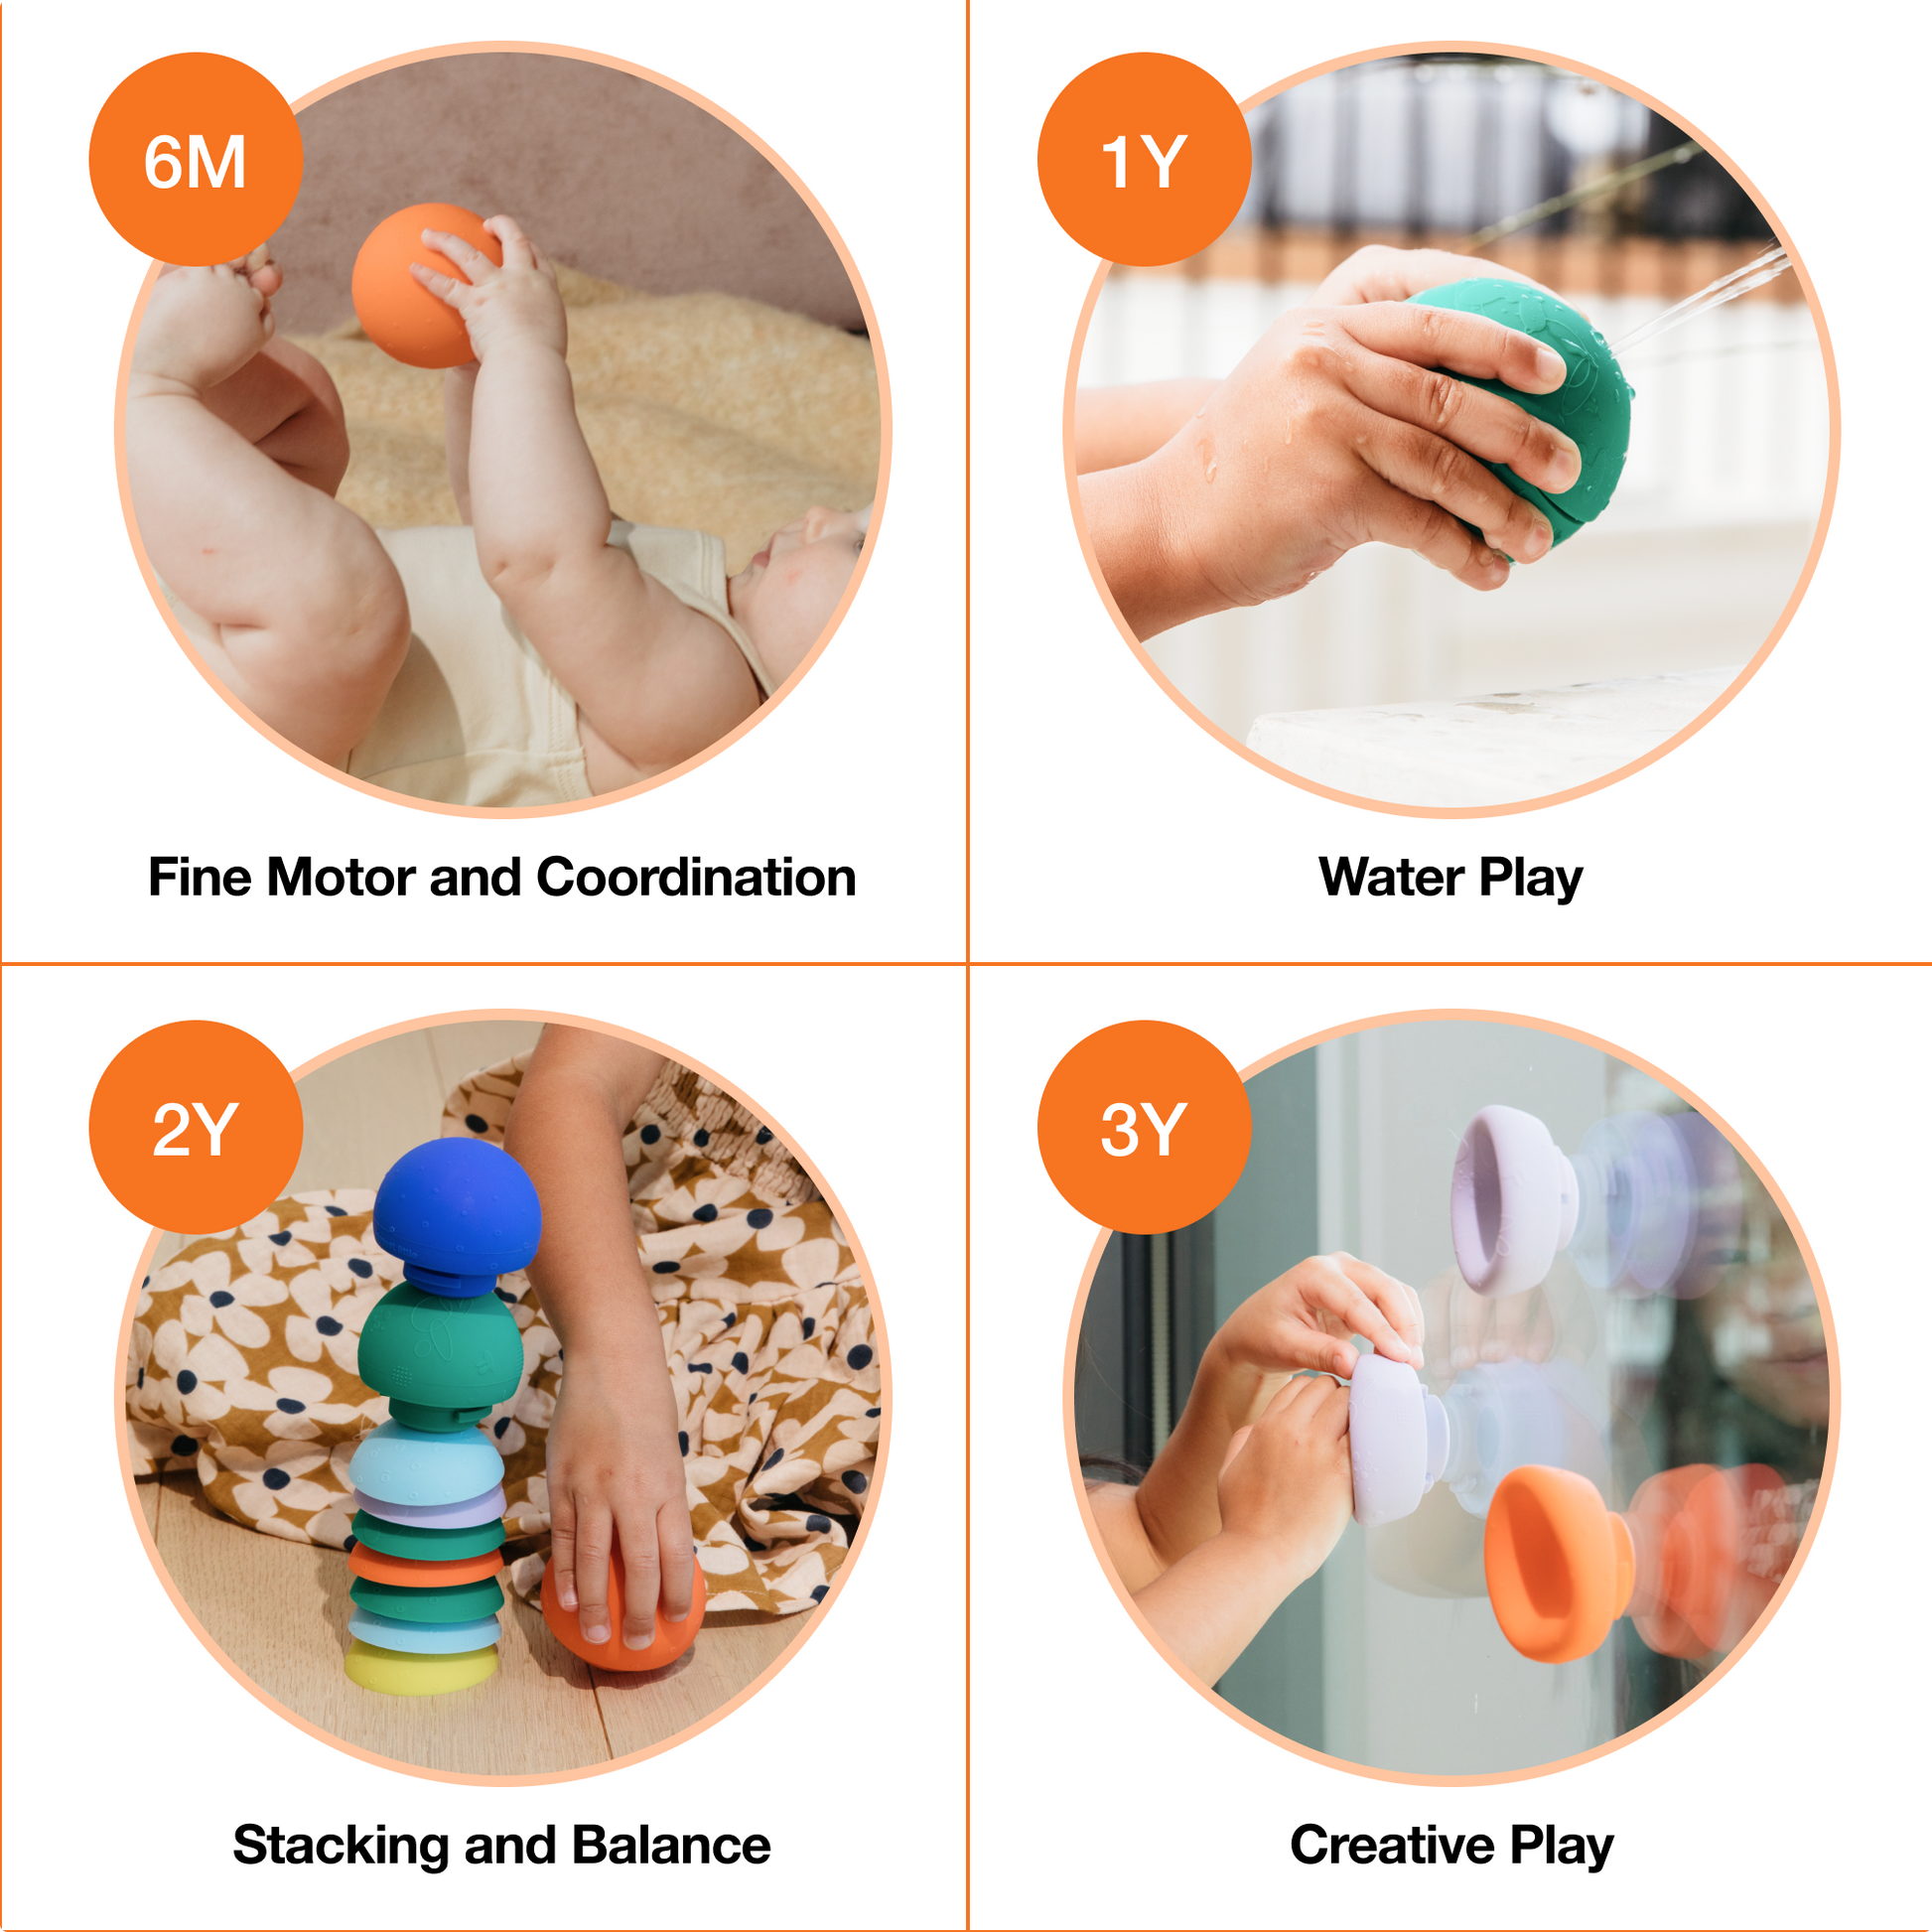 Four different ways to use the detachable toy ball: for fine motor skills, water play, stacking, and more creative fun. 